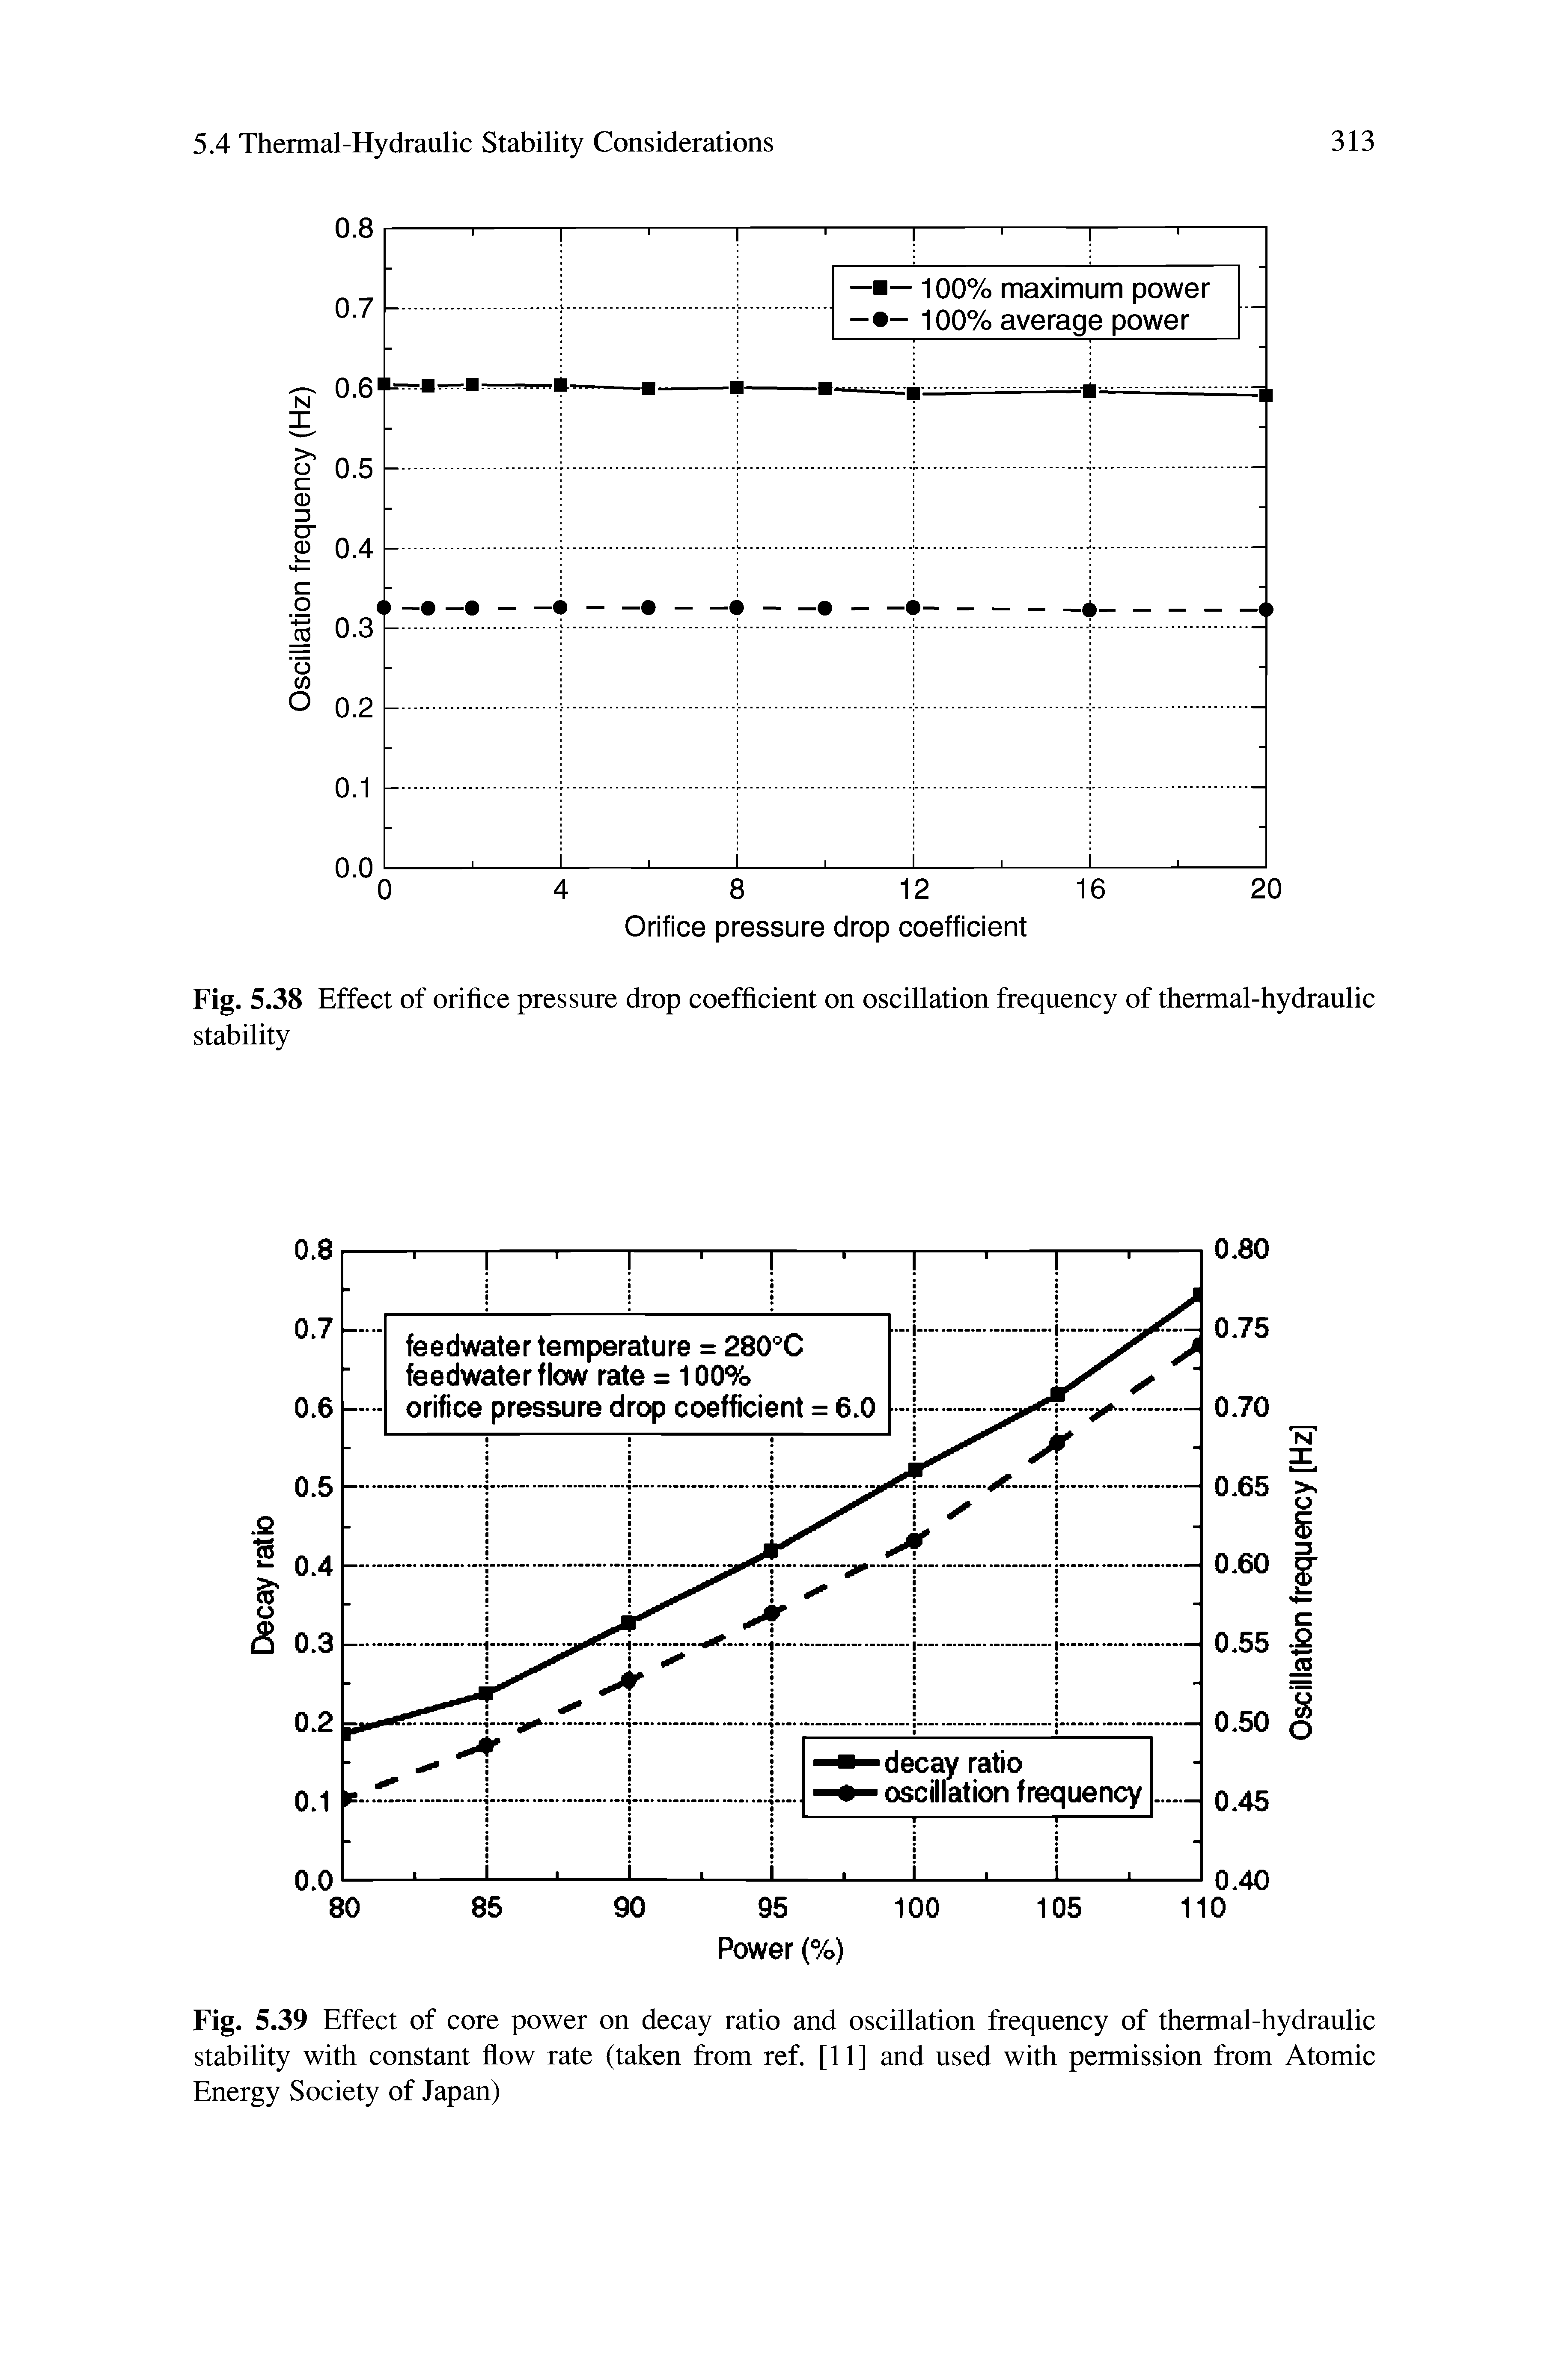 Fig. 5.39 Effect of core power on decay ratio and oscillation frequency of thermal-hydraulic stability with constant flow rate (taken from ref. [11] and used with permission from Atomic Energy Society of Japan)...